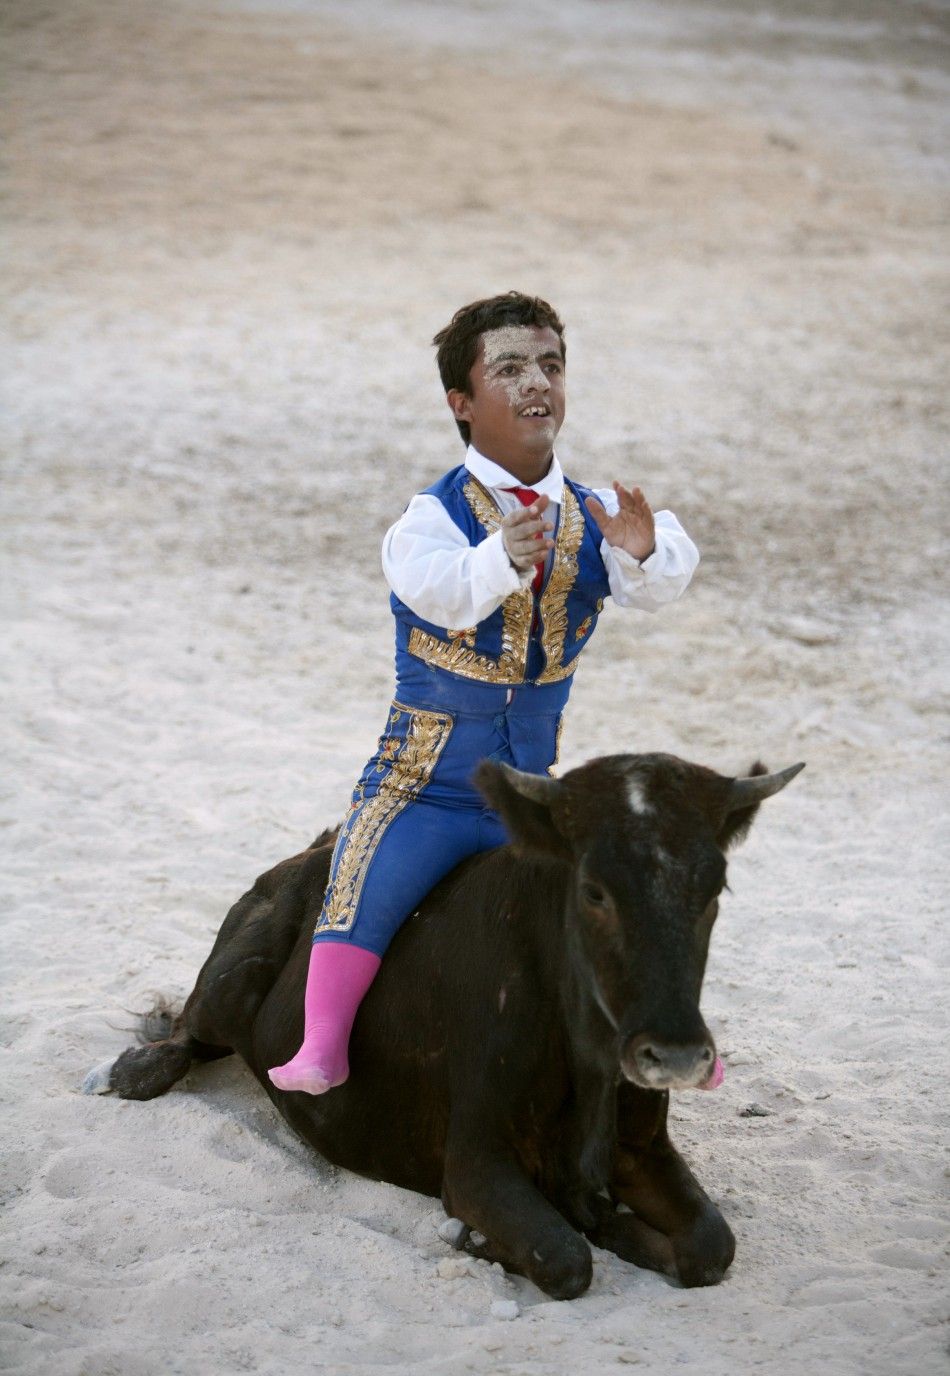 Dwarf bullfighter Jorge Vega from Los Enanitos Toreros sits on a calf at the end of a presentation in Cancun